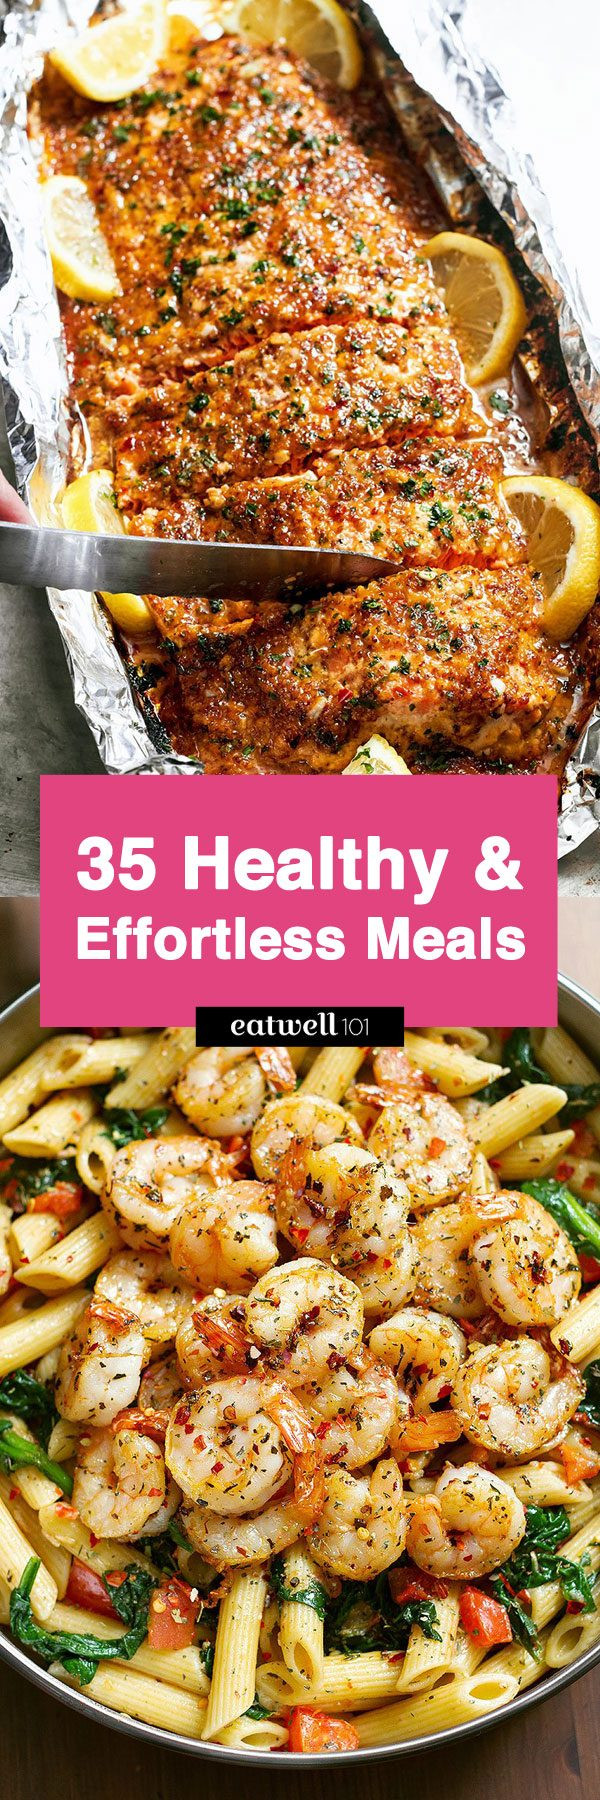 Simple Healthy Dinner Ideas
 43 Low Effort and Healthy Dinner Recipes — Eatwell101